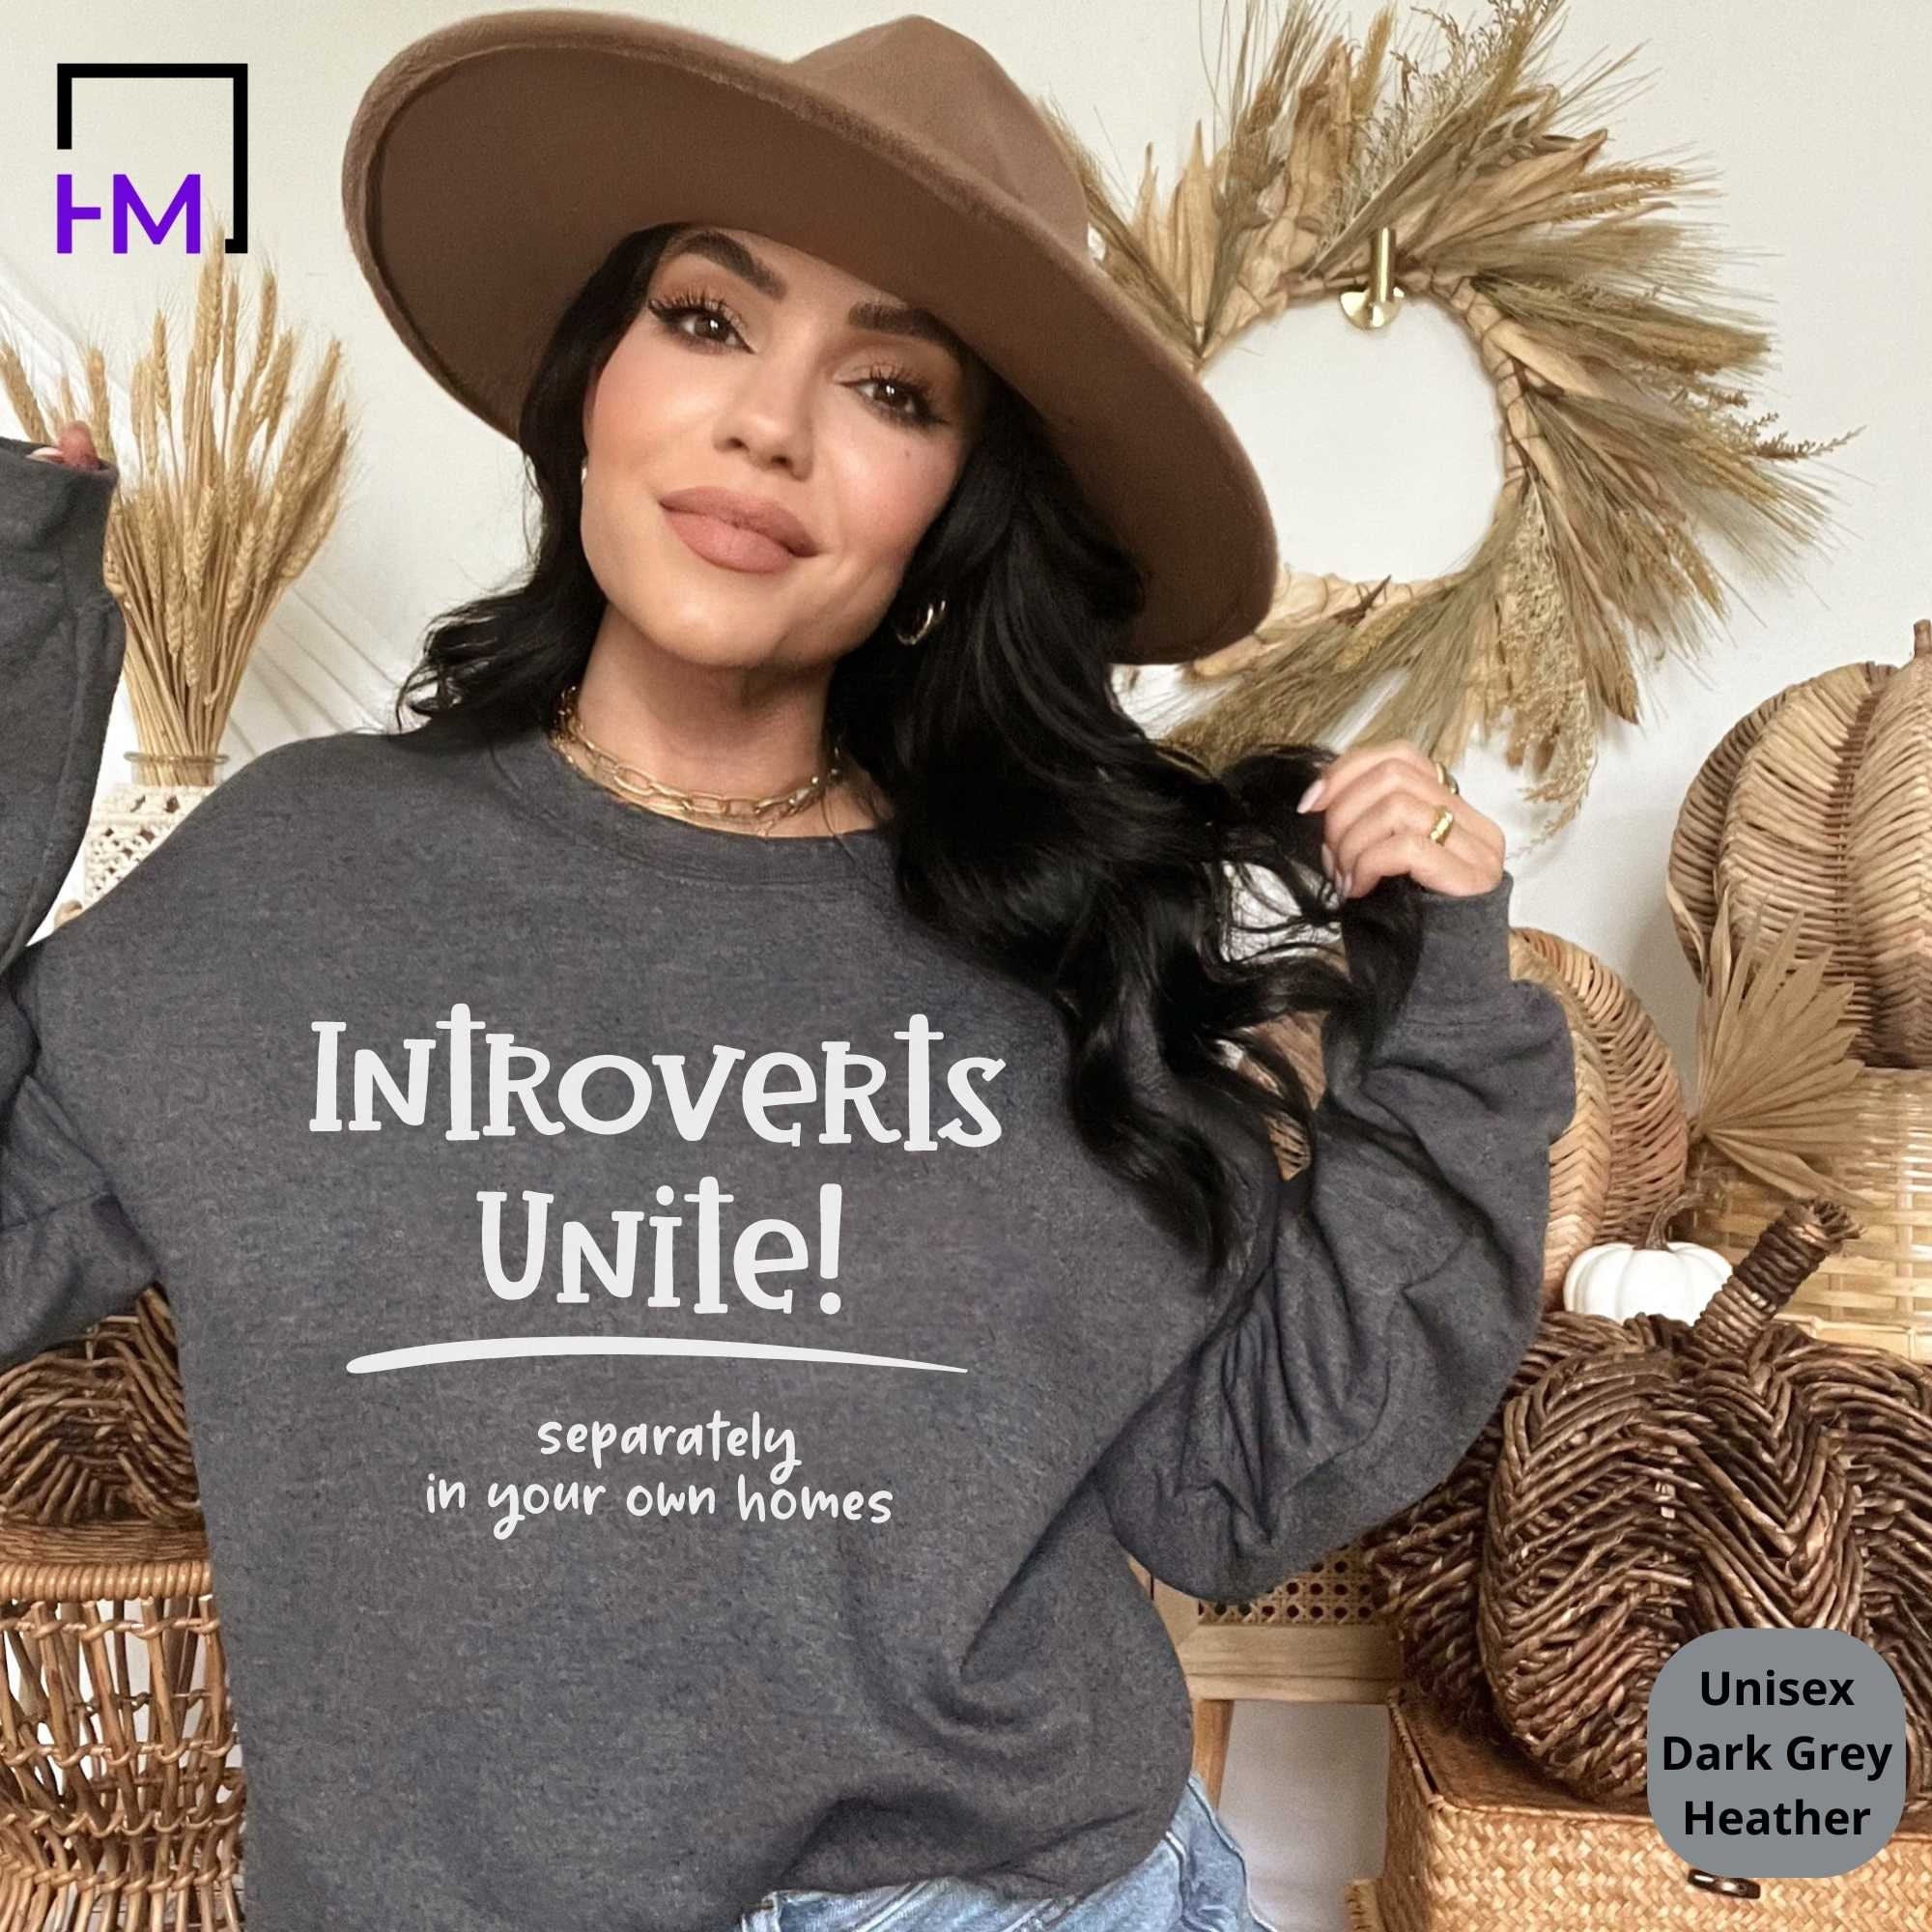 15 The Best Gifts For Single Women | Best gifts, Gifts, Introverted gifts